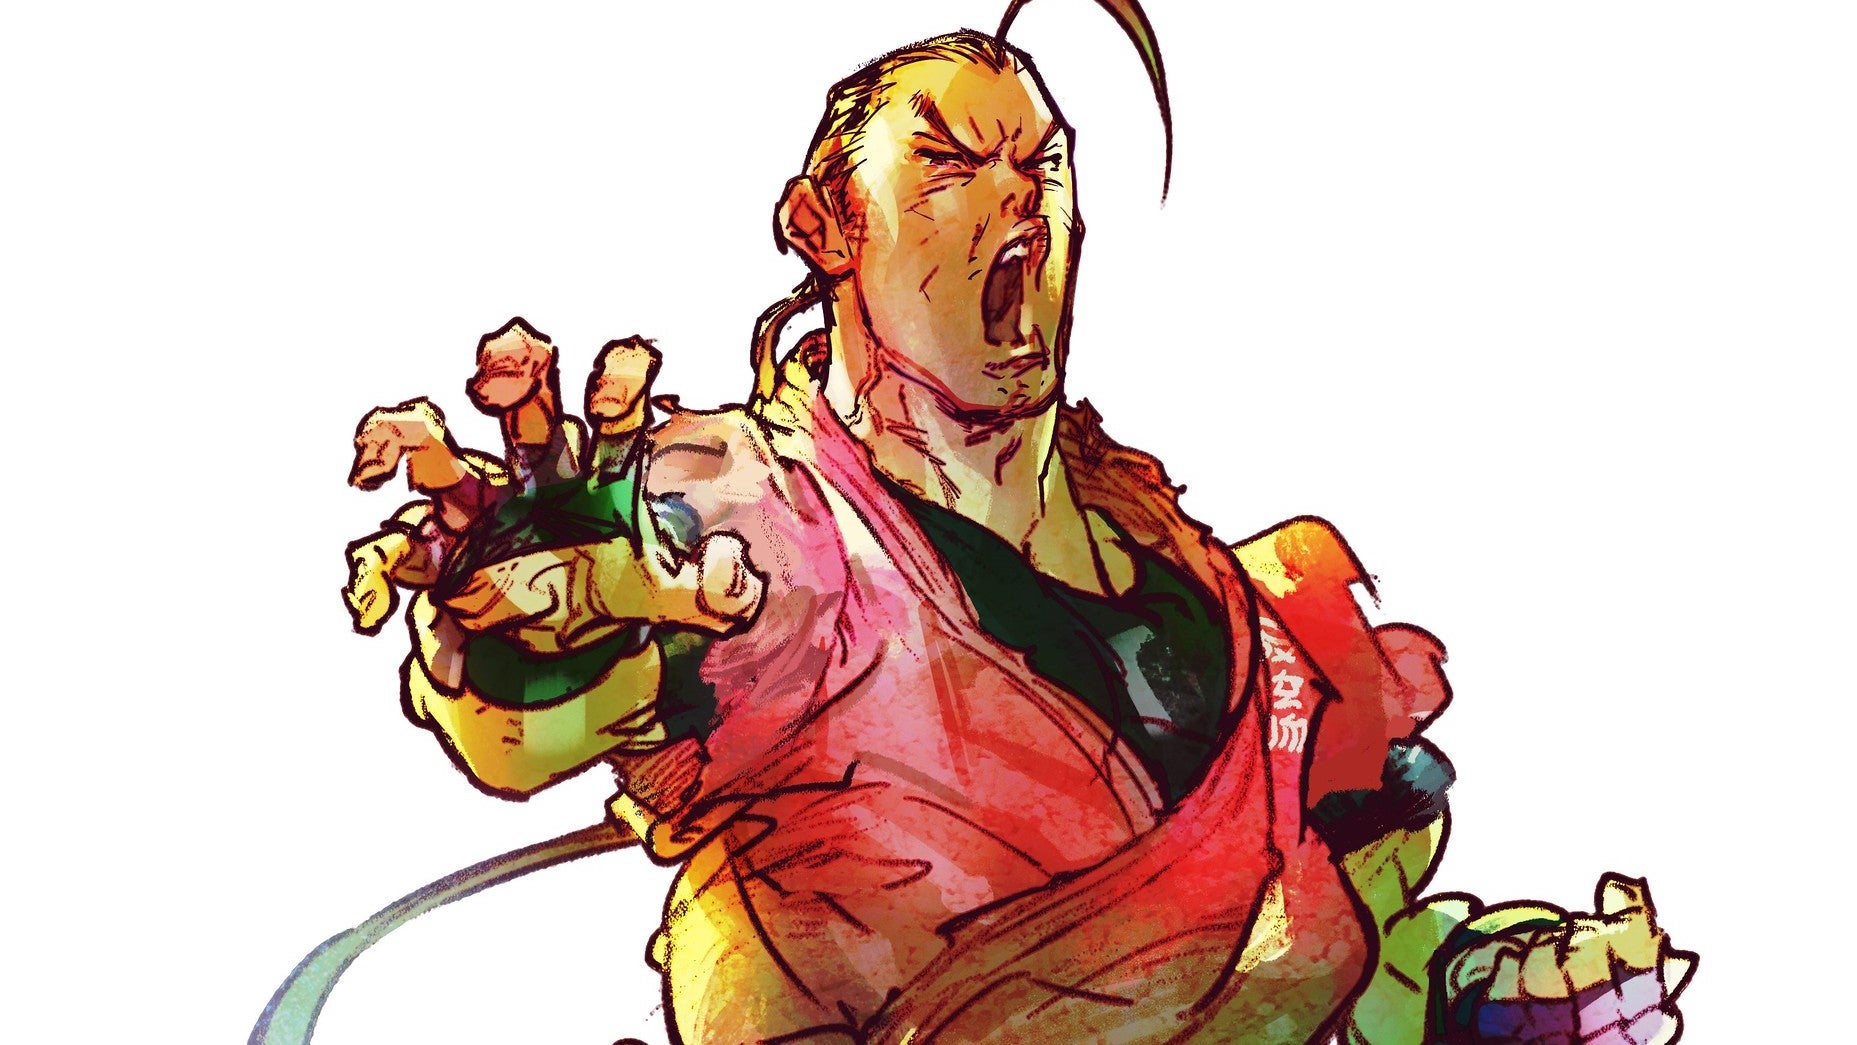 Image for Here's your first look at Dan Hibiki in Street Fighter V